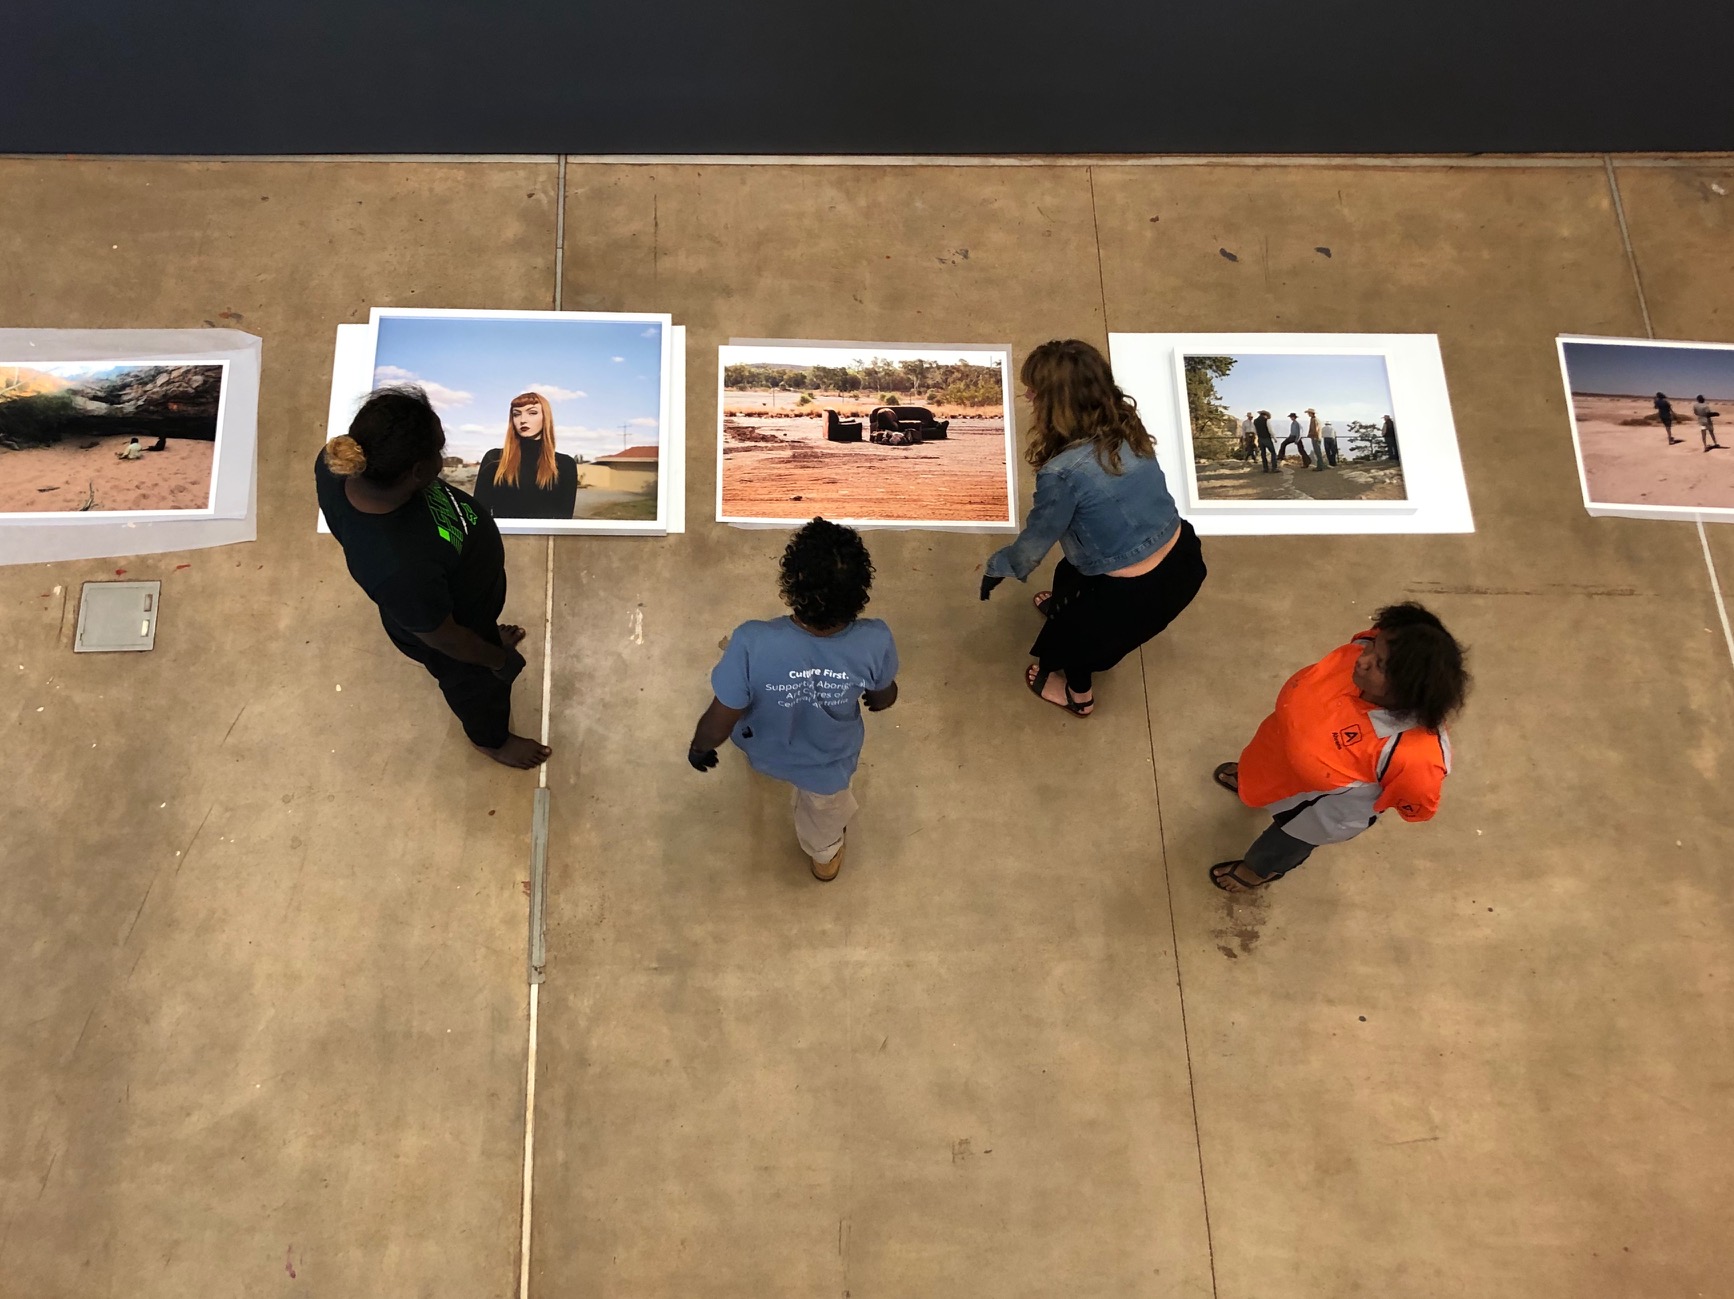 Install for 'How Did I Get Here', 2020 at East Pilbara Art Centre. Photo by Jack Pam